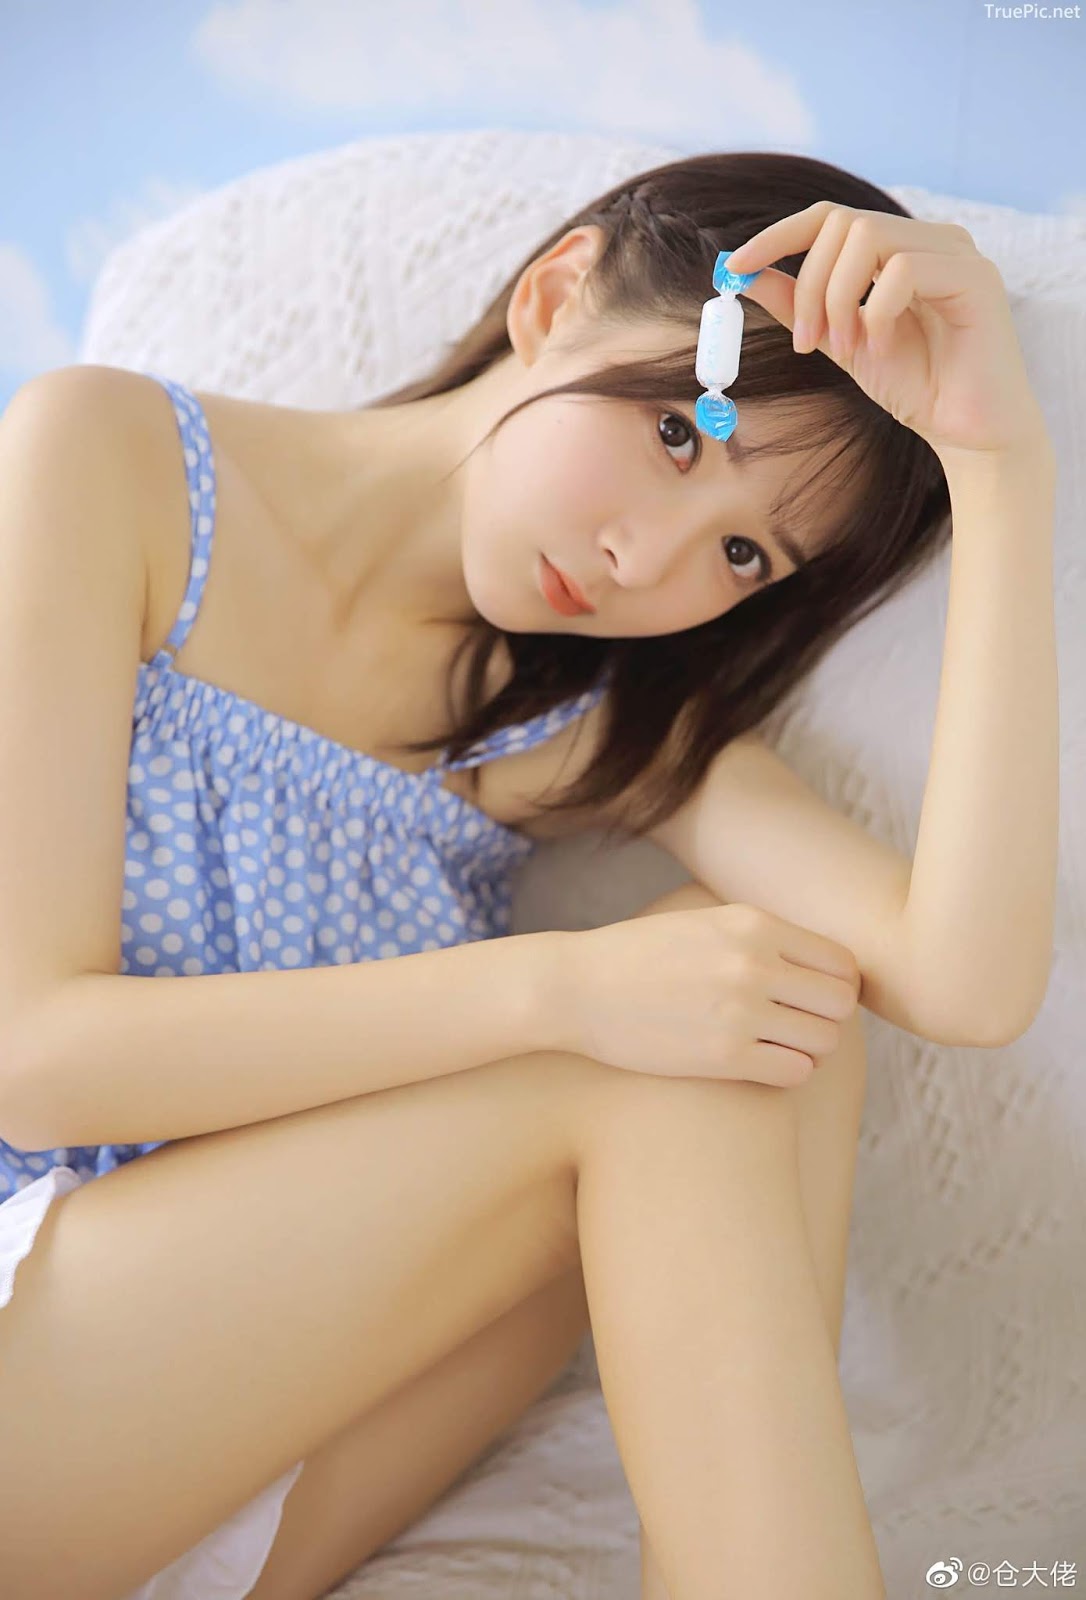 Chinese cute girl - She is a Beautiful sweet candy girl - TruePic.net - Picture 11